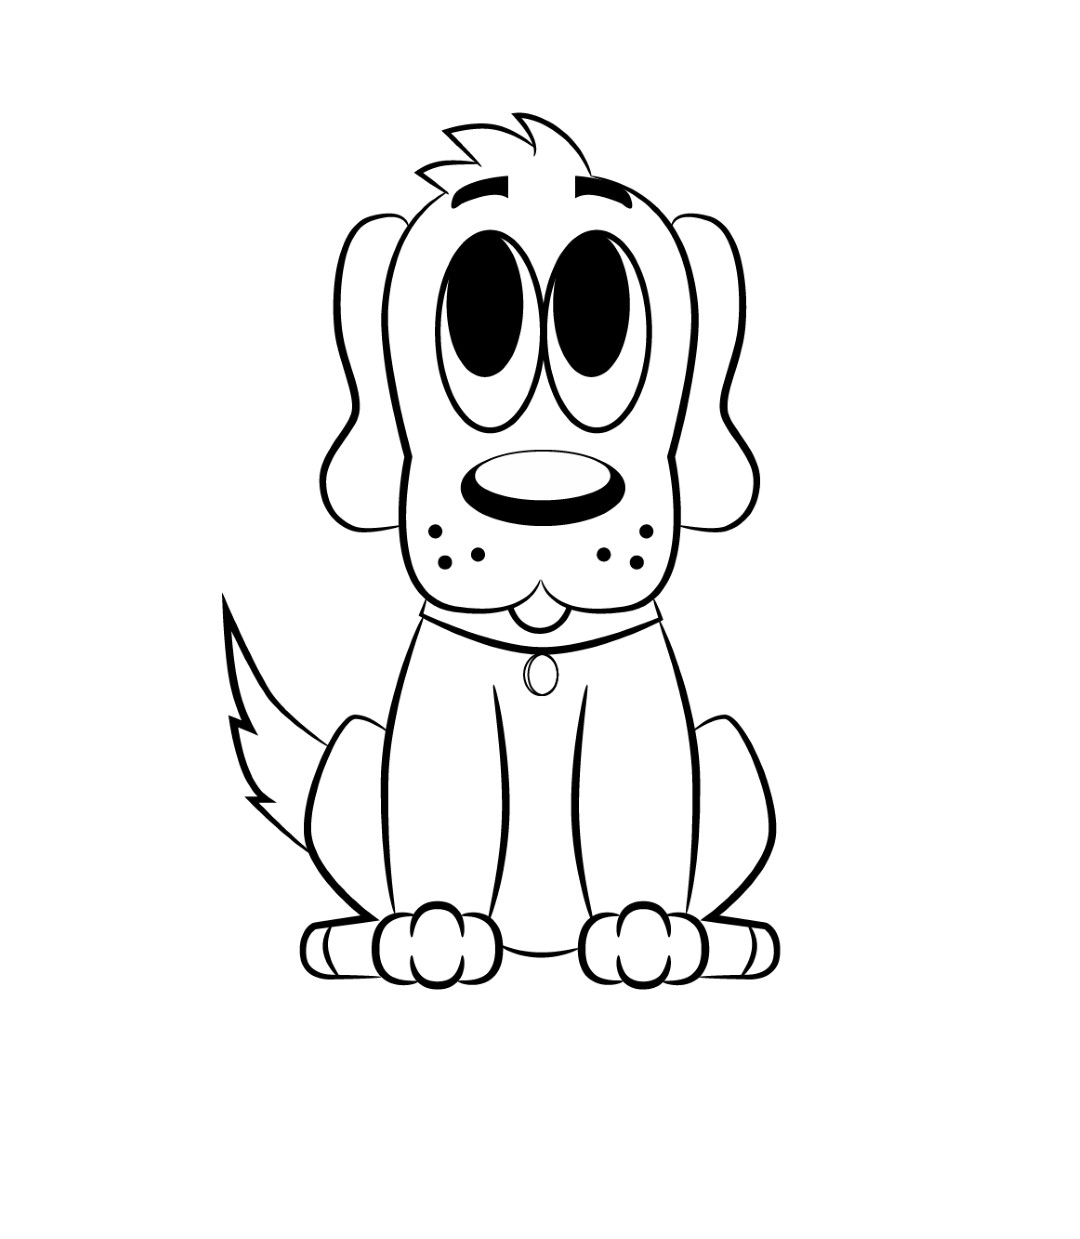  Drawing Sketching Animal Caricature Dogs for Beginner